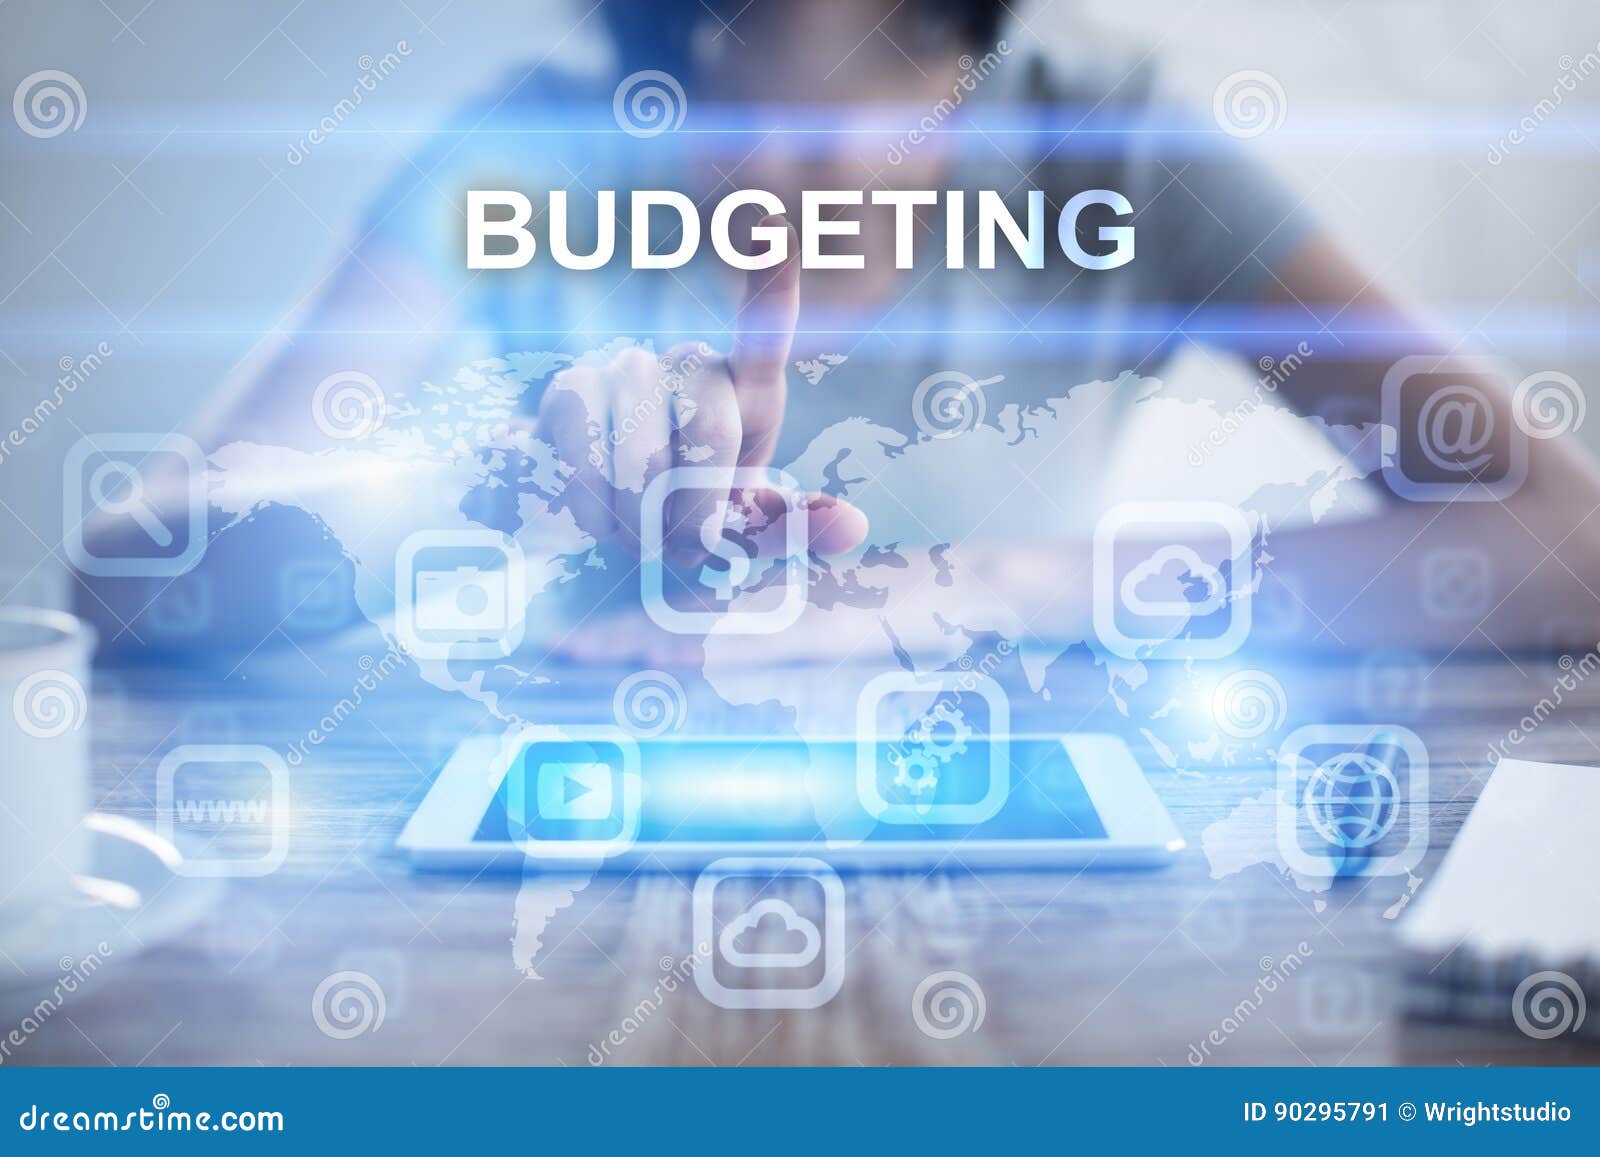 woman using tablet pc, pressing on virtual screen and selecting budgeting